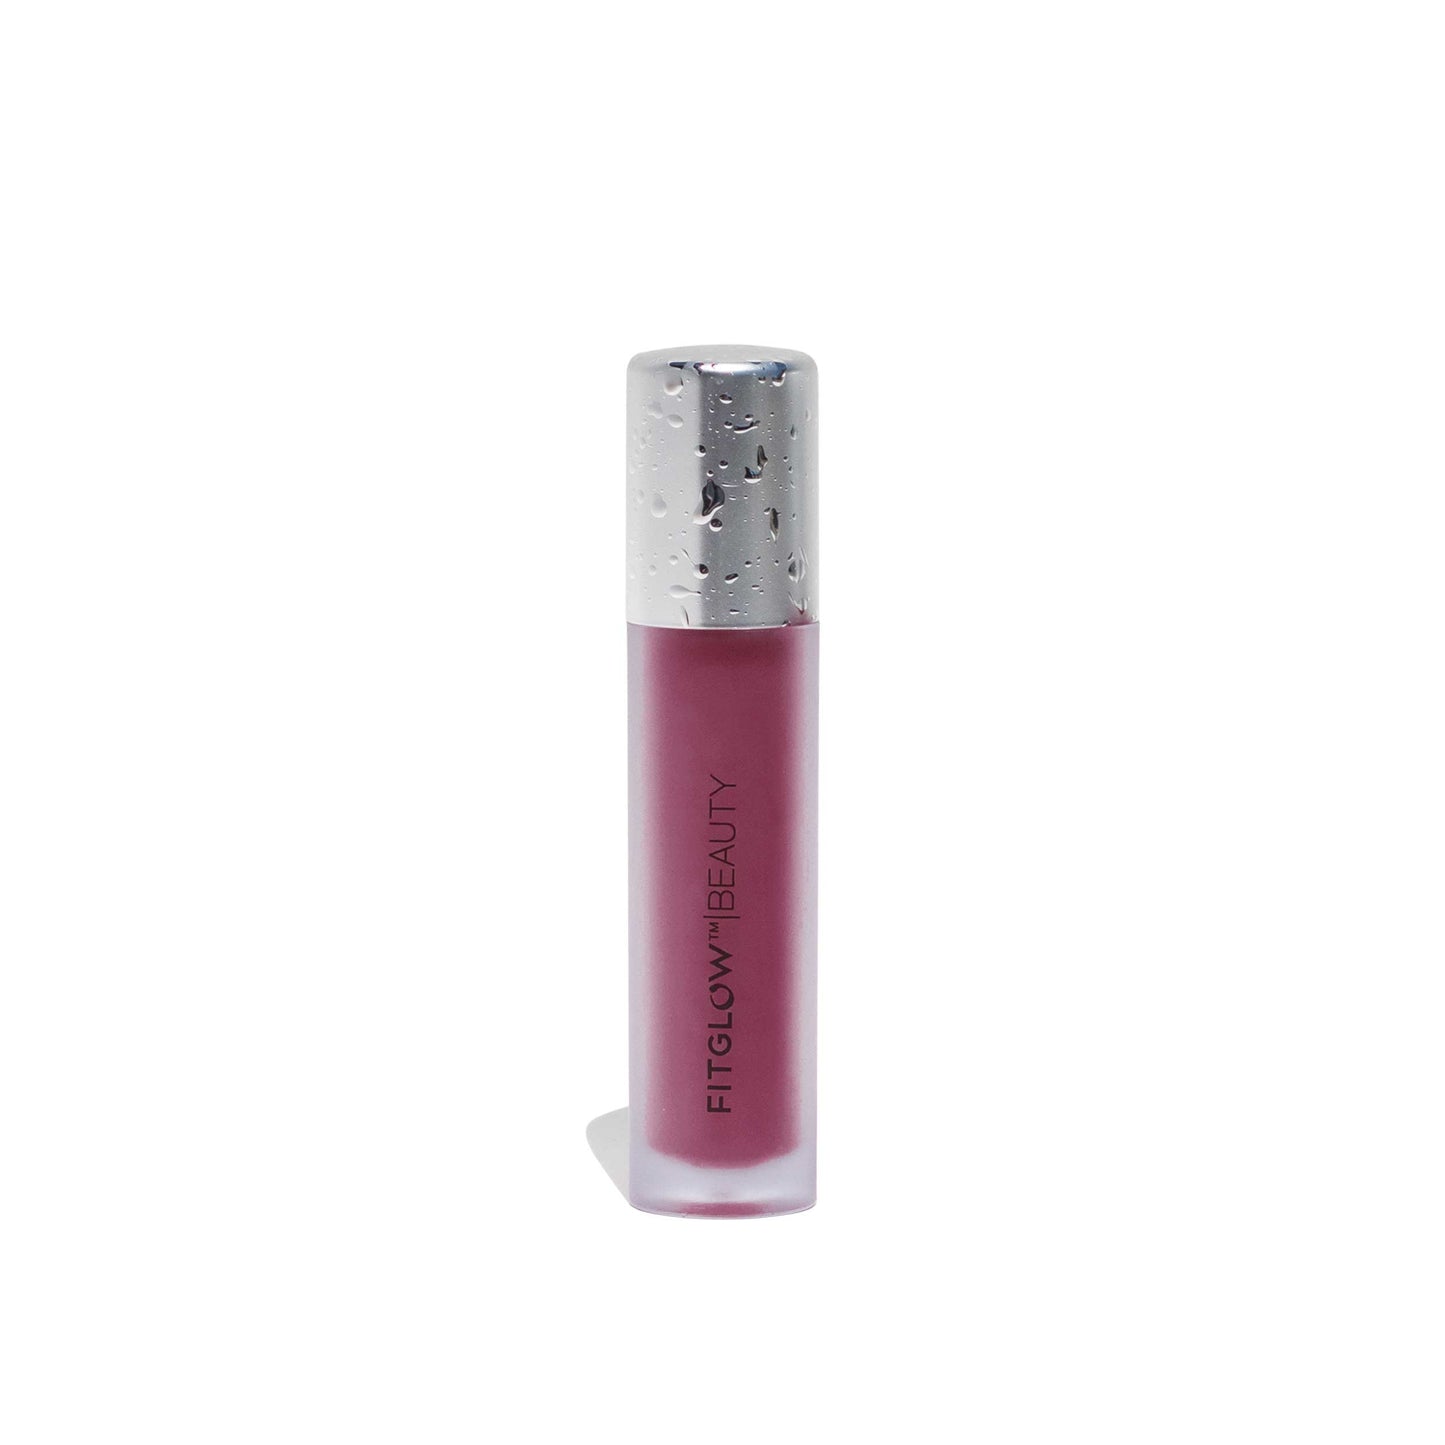 fitglow beauty lip colour serum ever